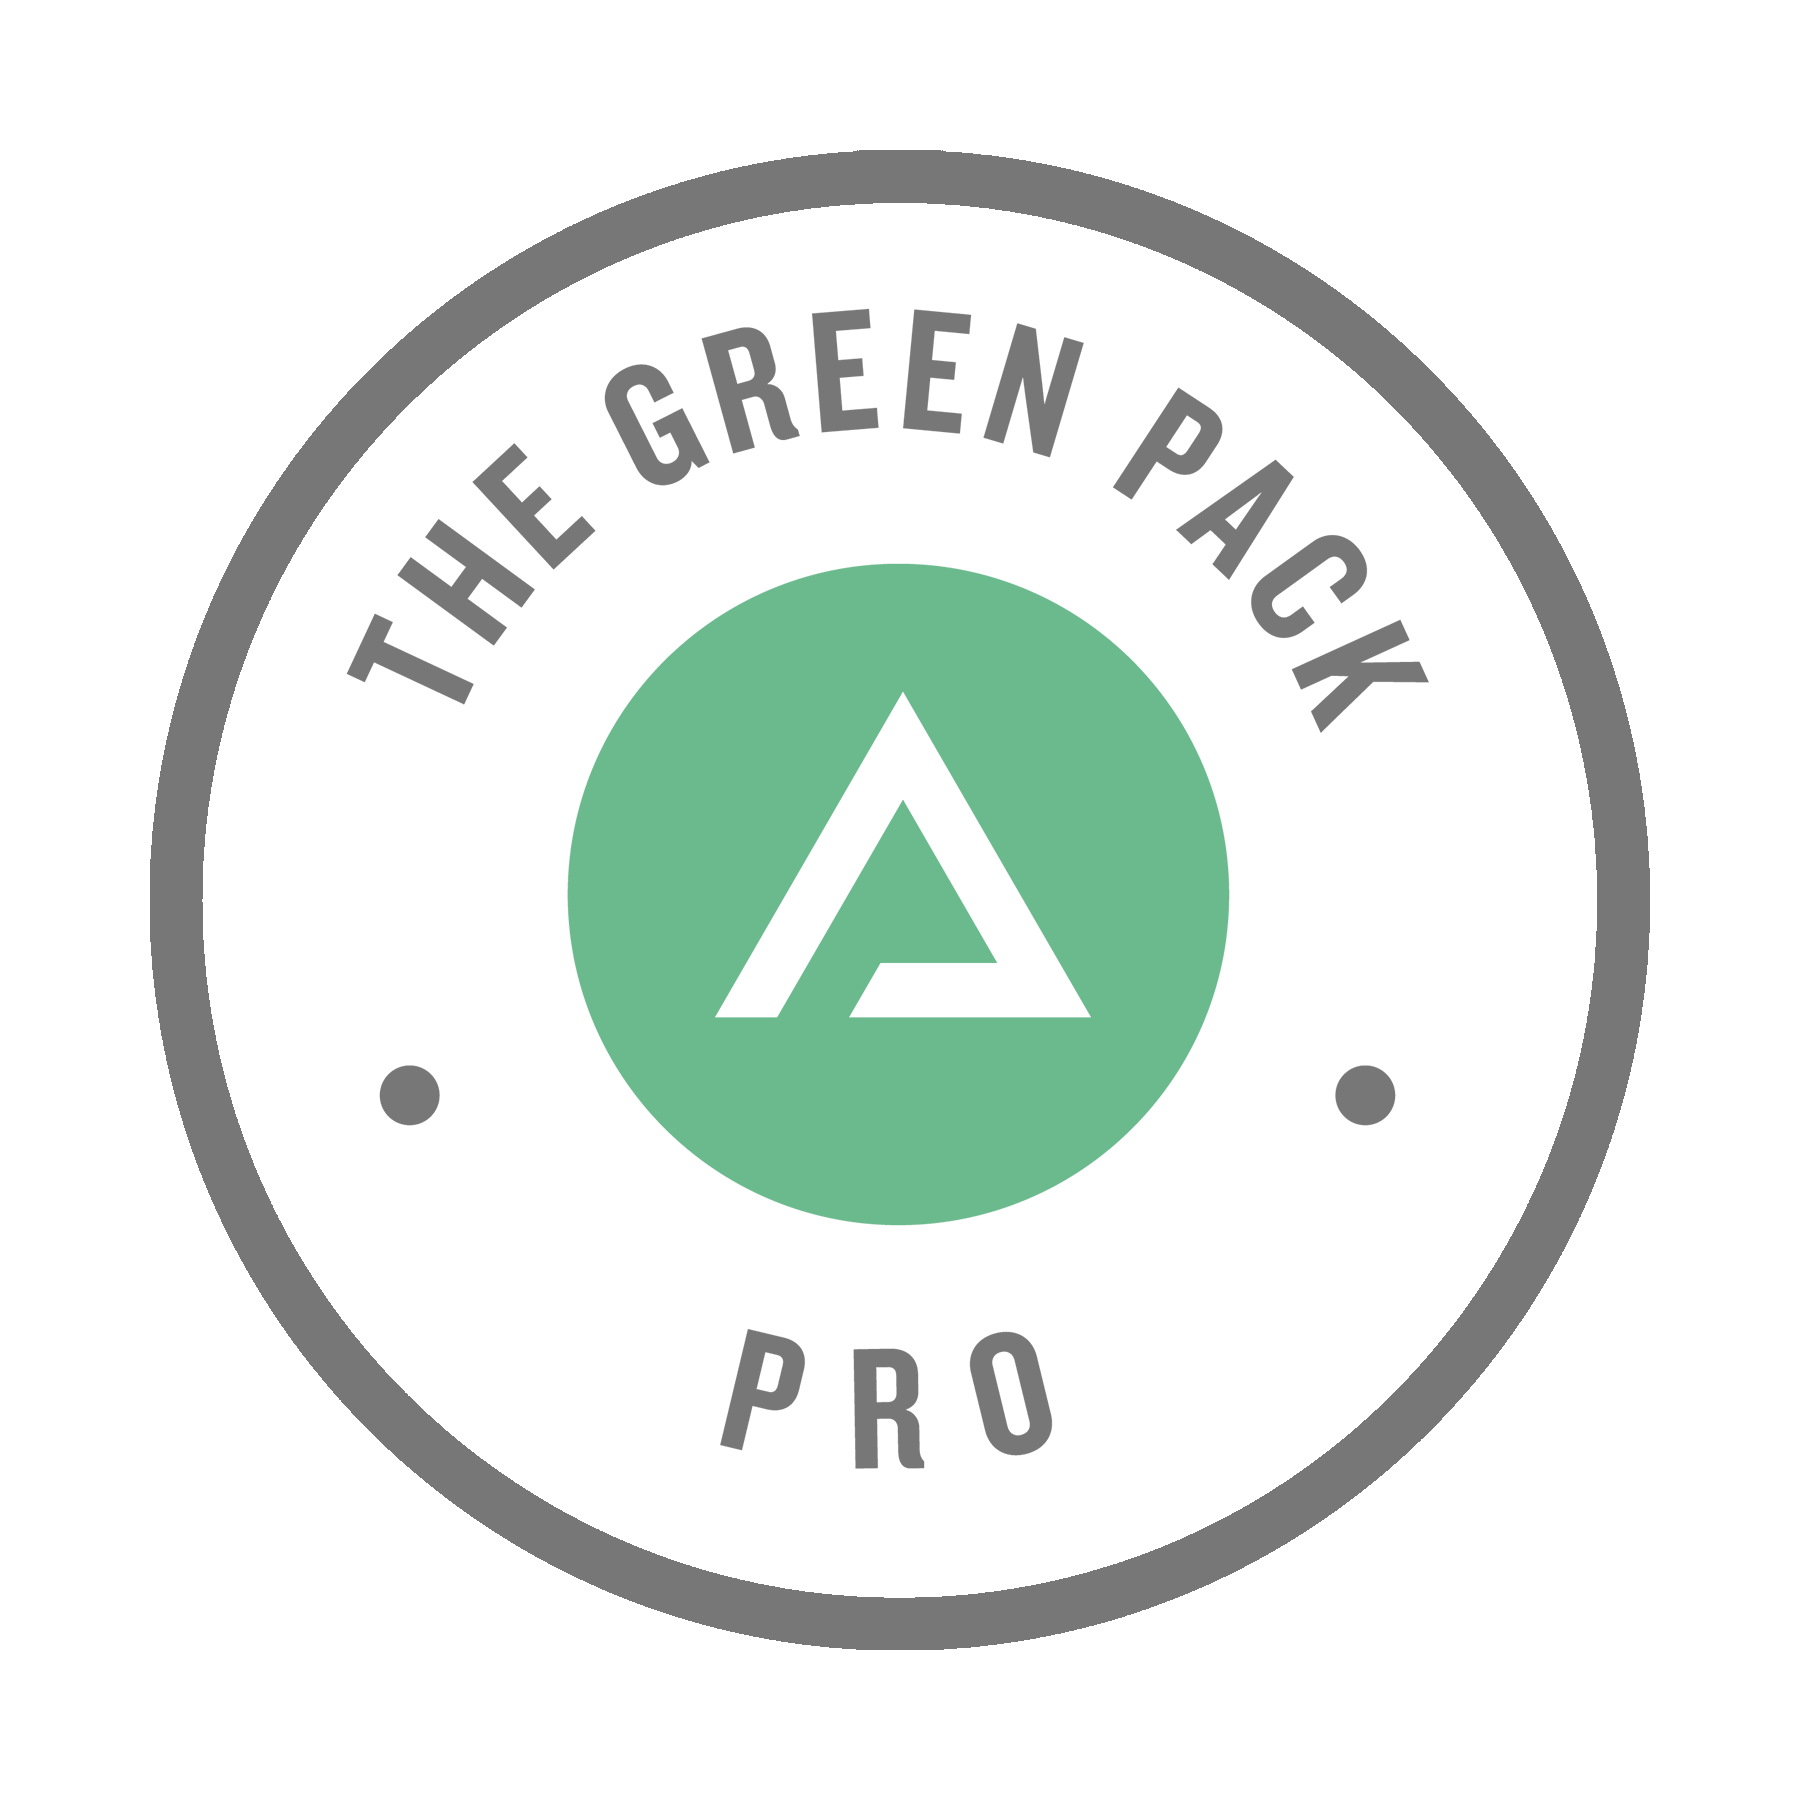 The Archetype Process – THE GREEN PACK PRO